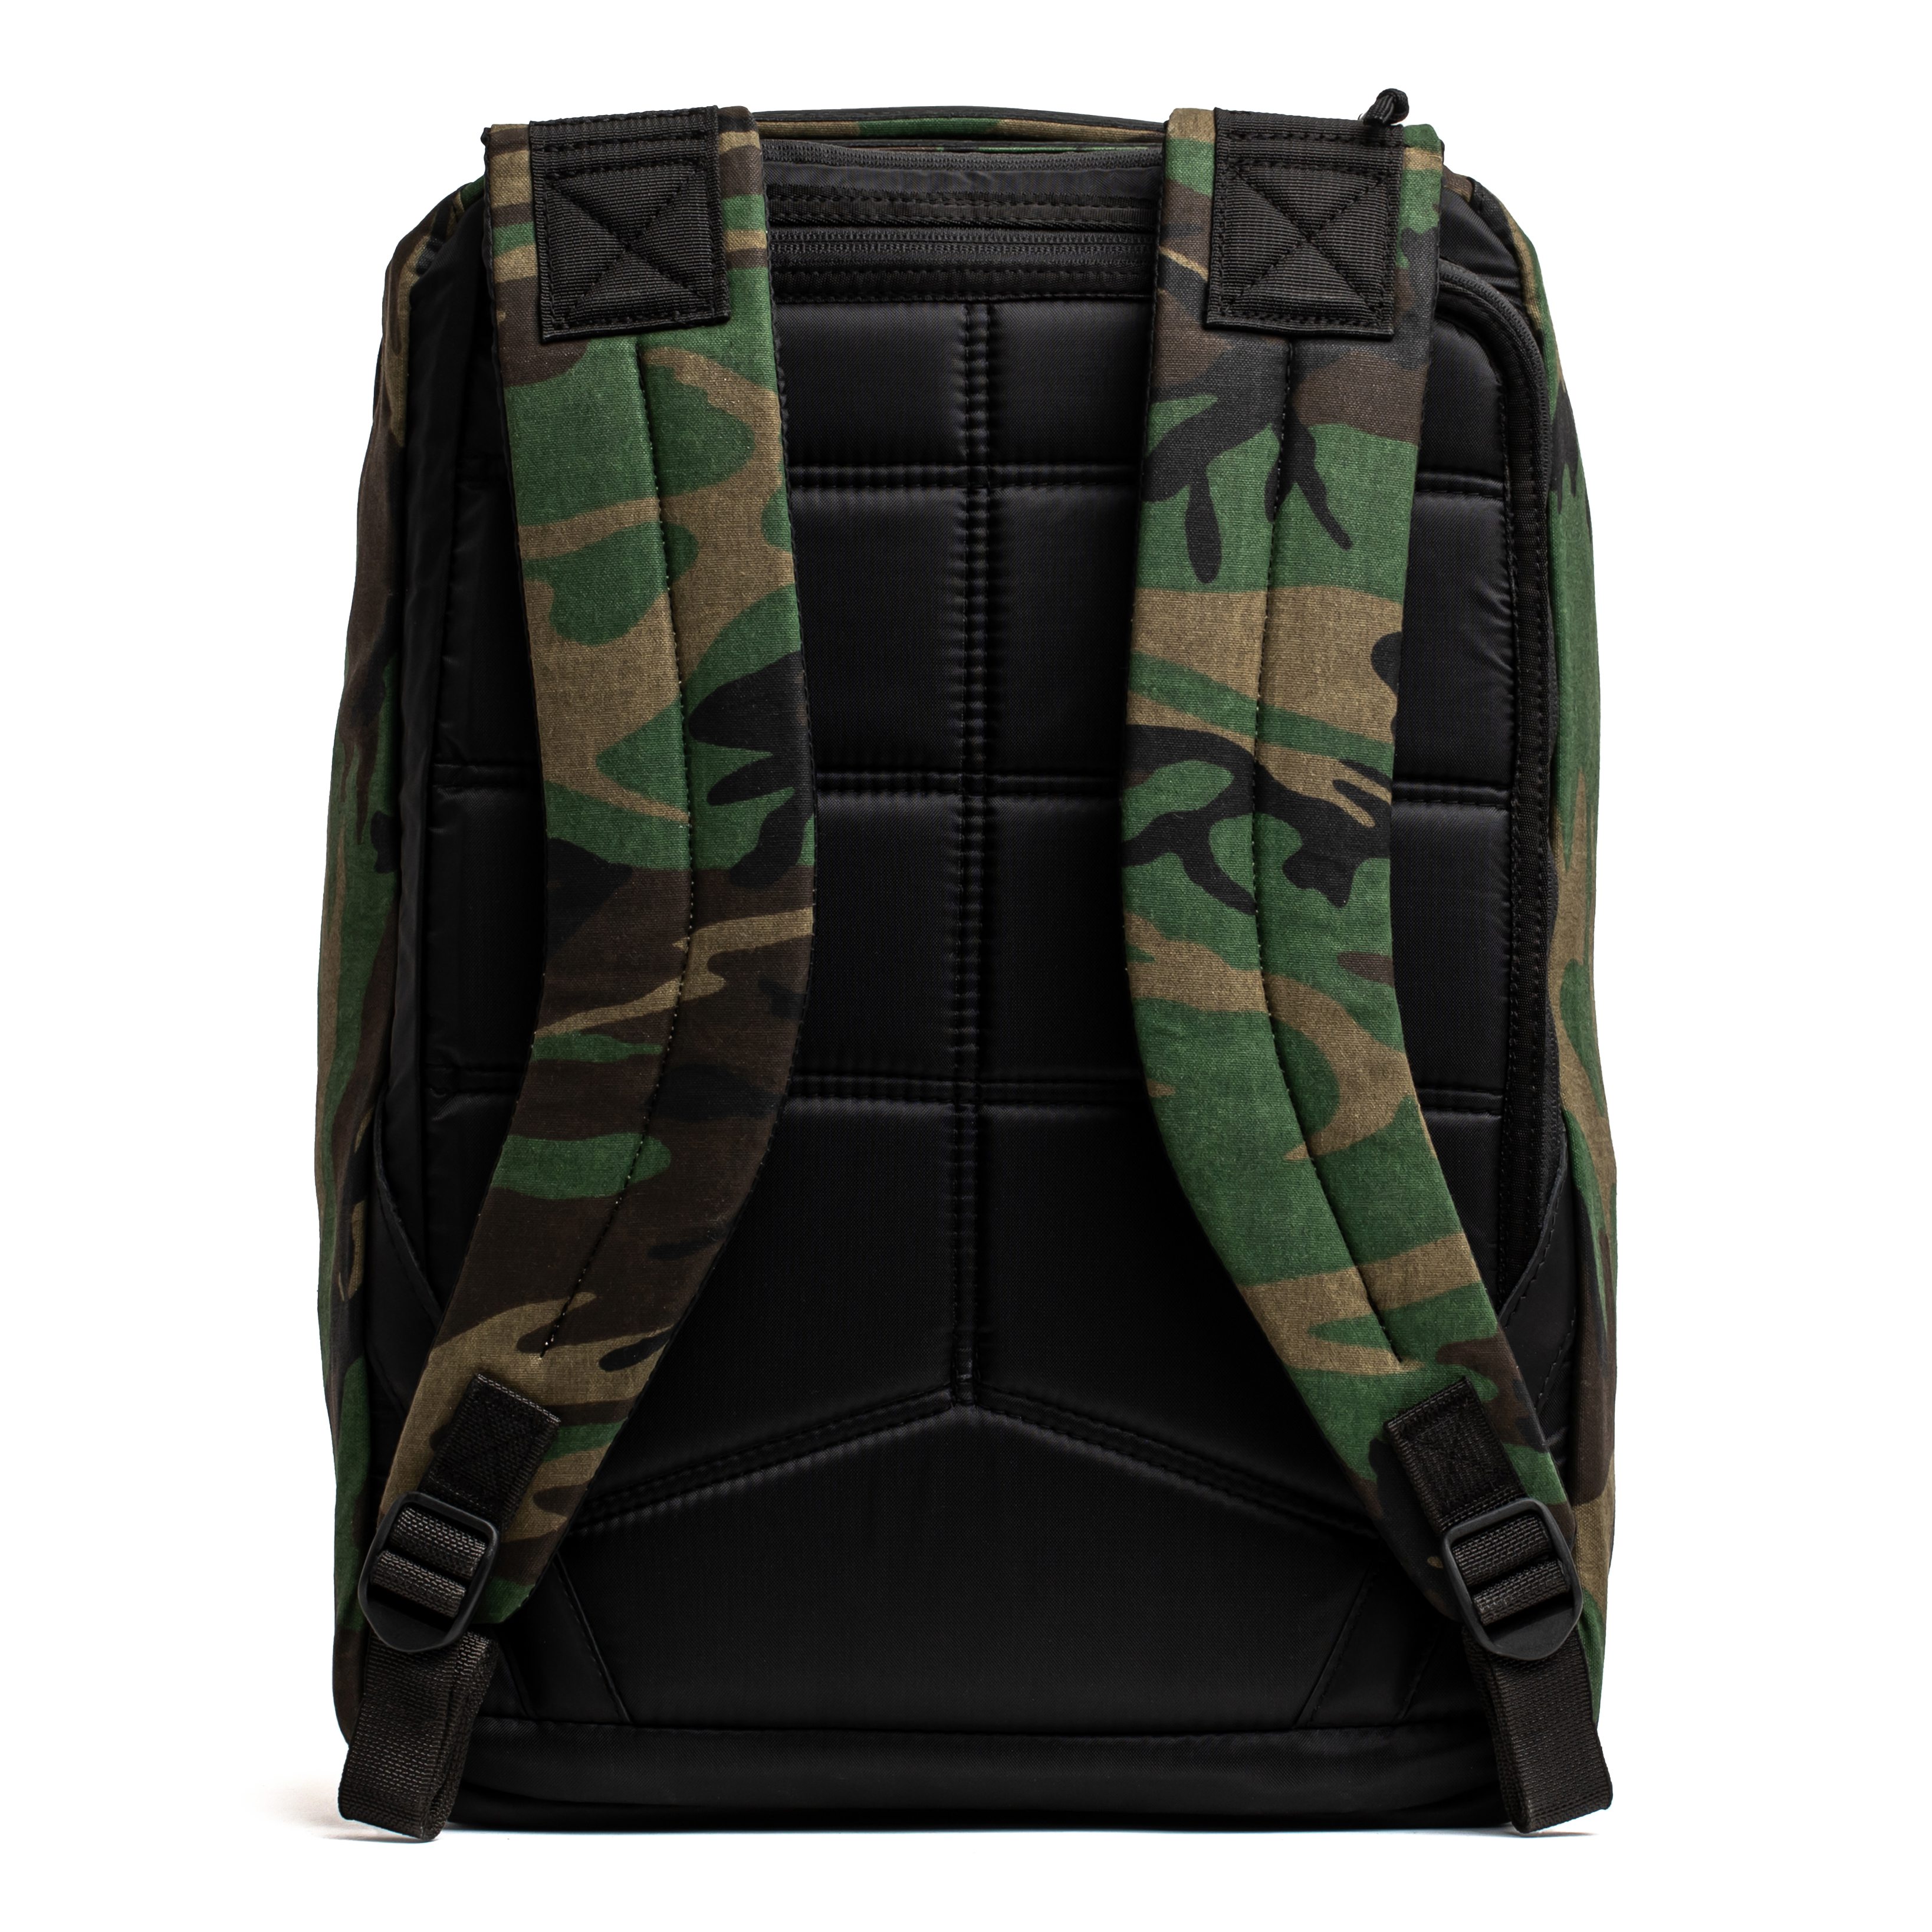 Backpack_tree camoバッグ - www.flourishchemicals.in